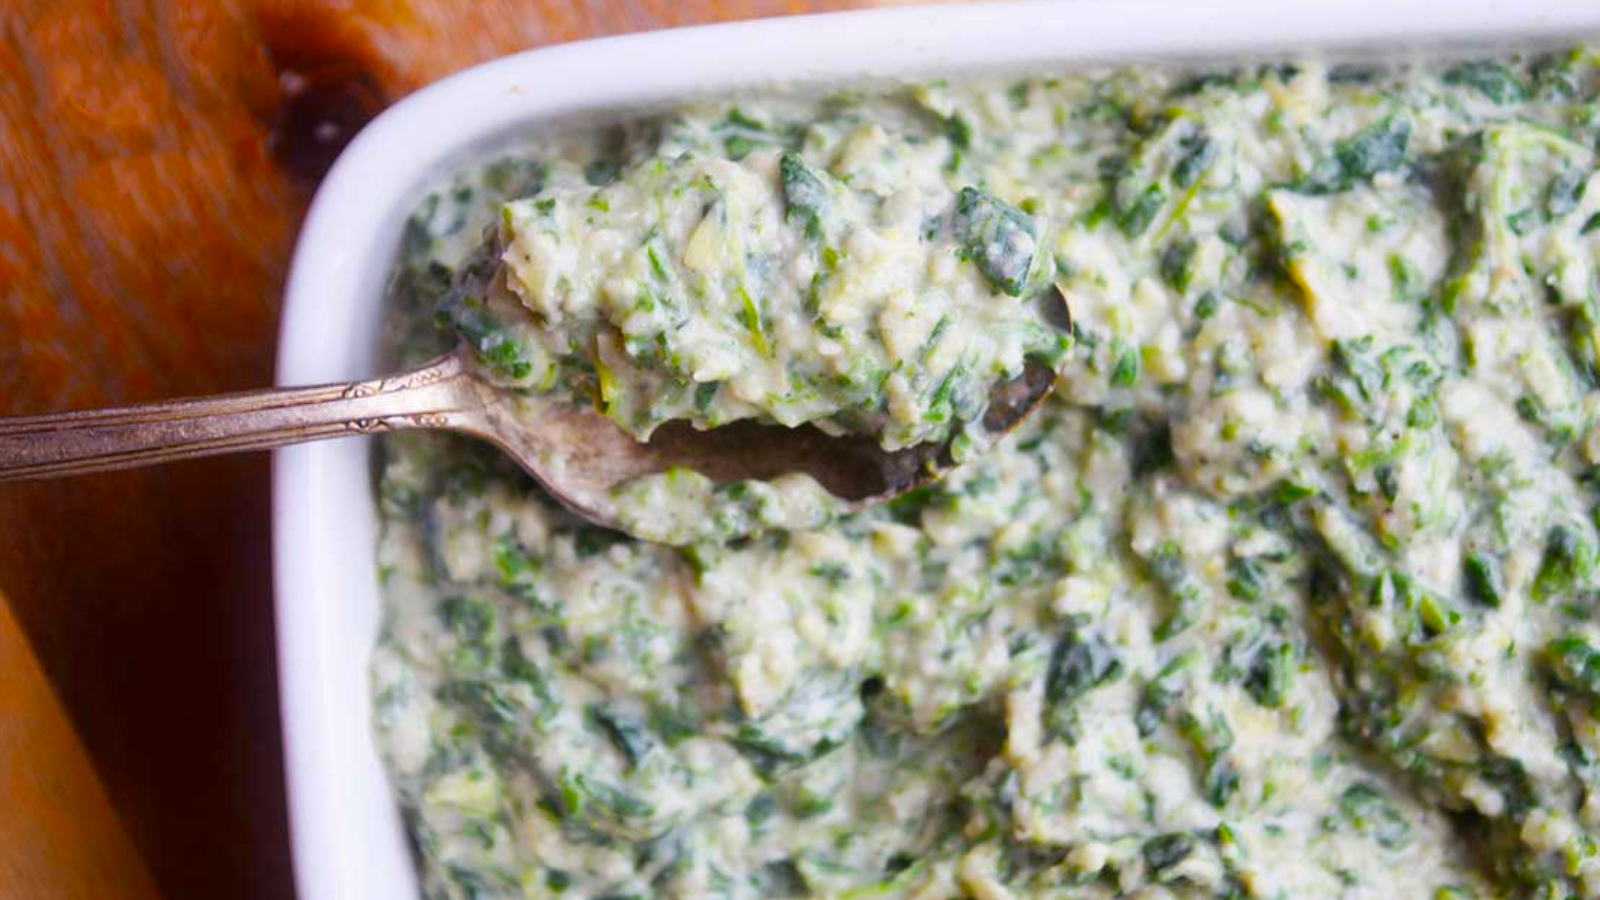 A spoon lifts a bit of spinach artichoke dip out of a white dish.